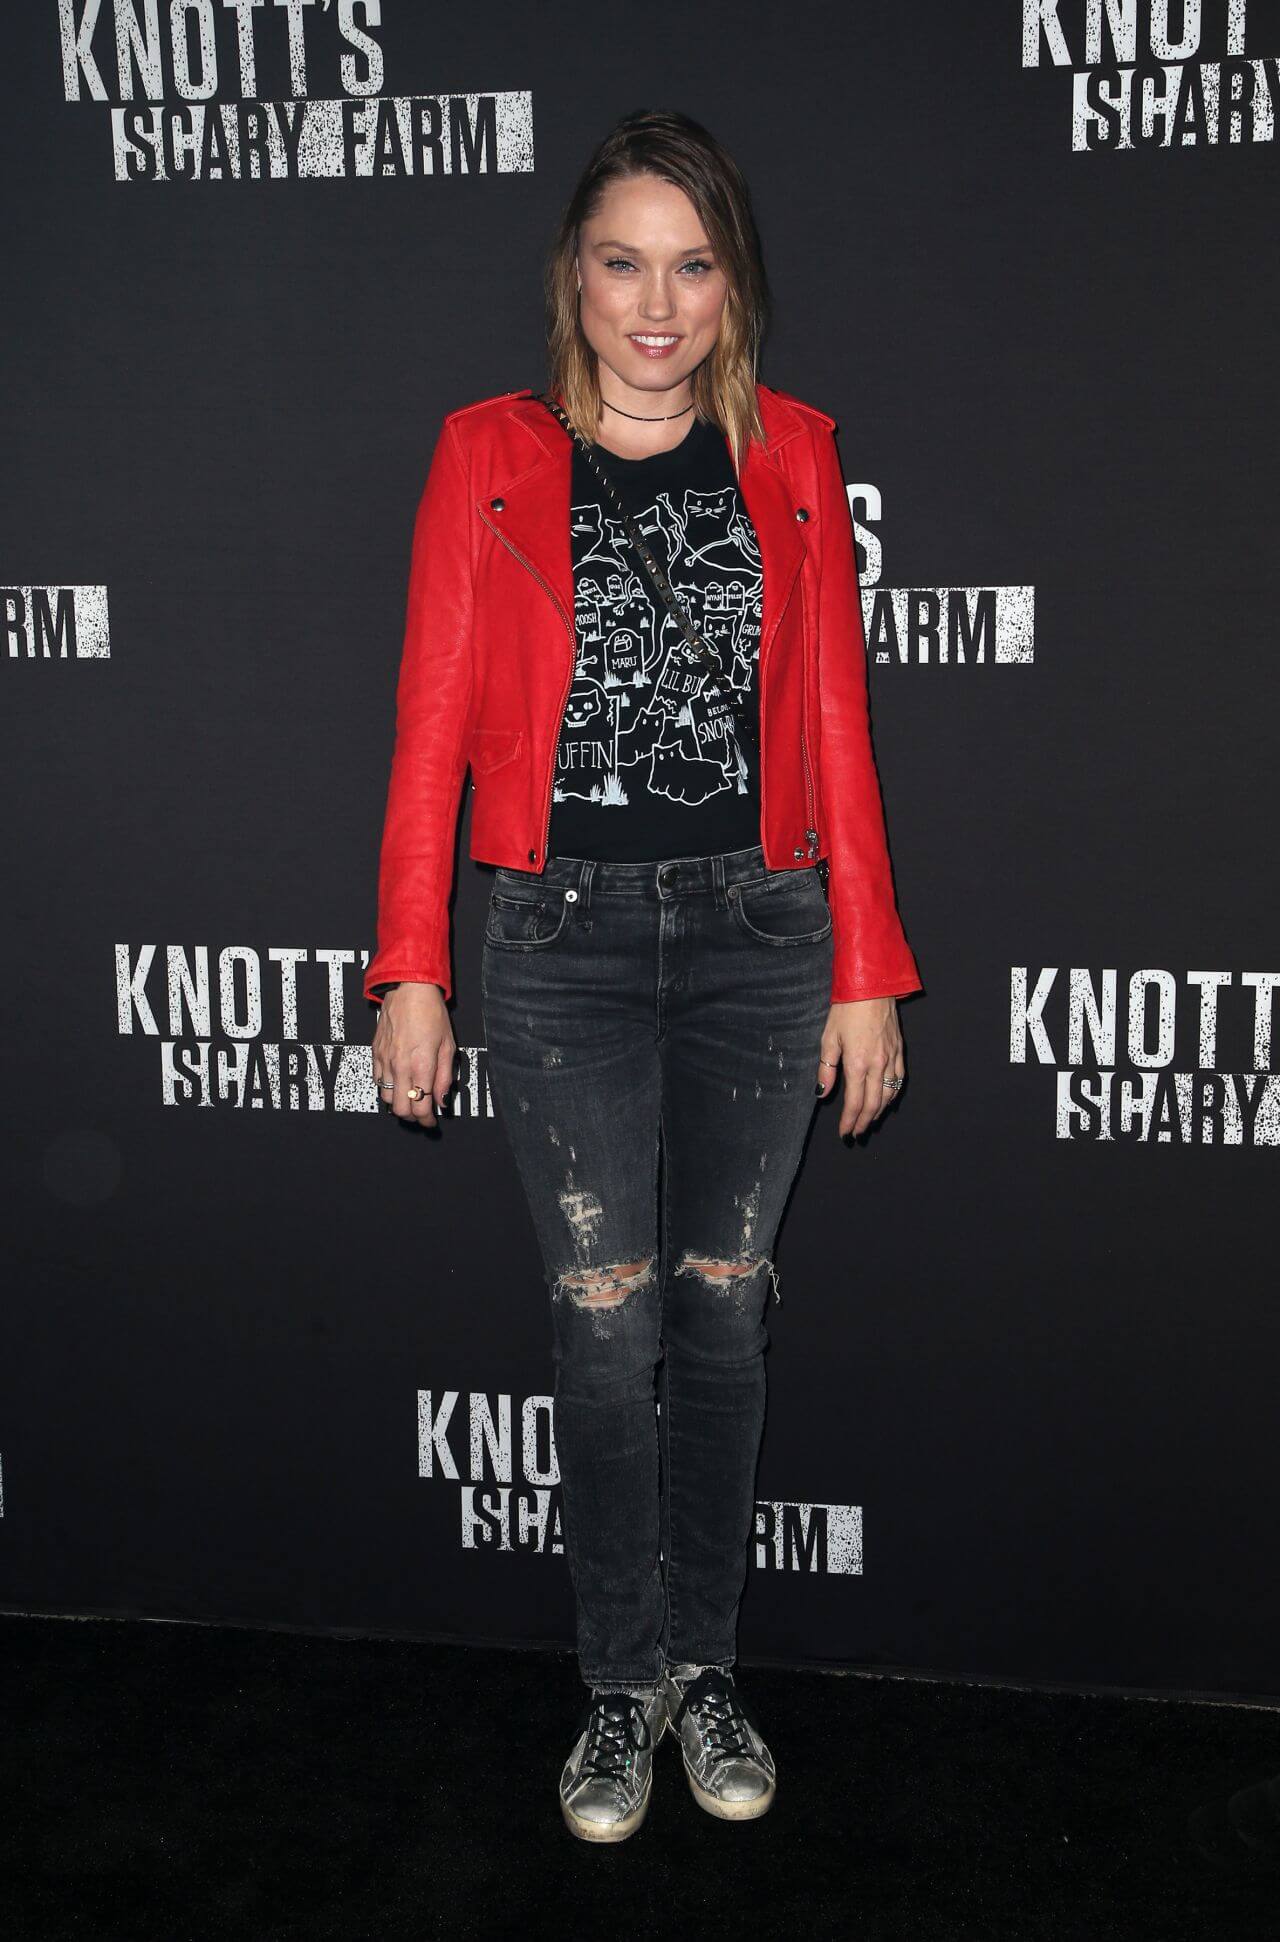 Clare Grant  In Red Leather Jacket Under a Black T-shirt With Ripped Jeans At Knott’s Scary Farm Celebrity Night in Buena Park